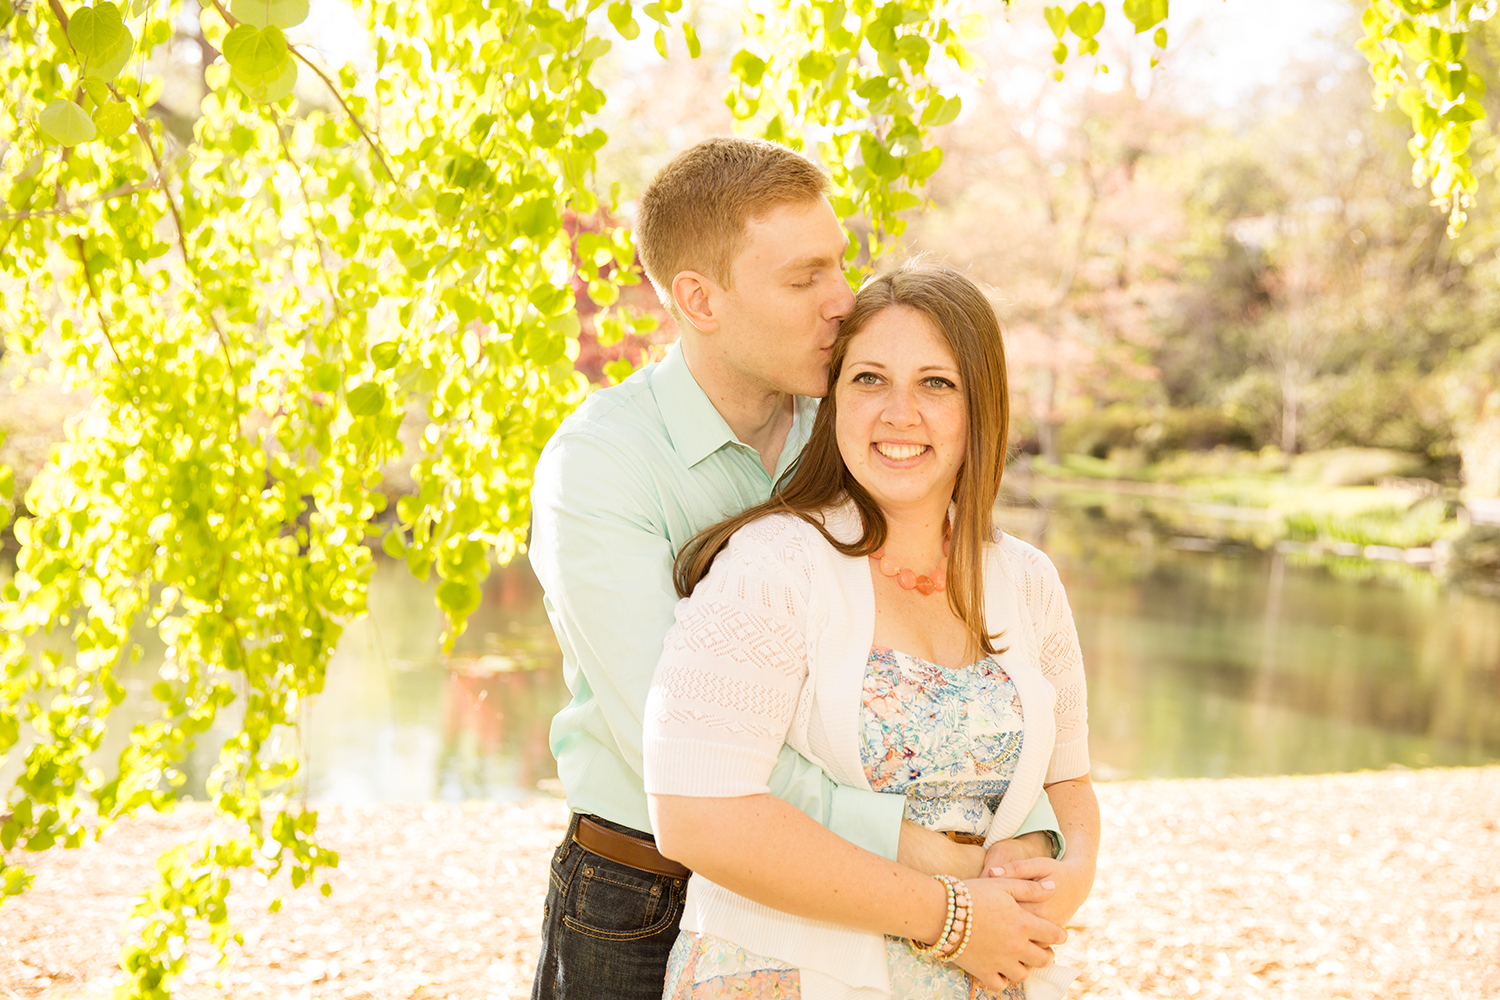 Christina  Mikes Spring Engagement Shoot at Maymont - Image Property of www.j-dphoto.com